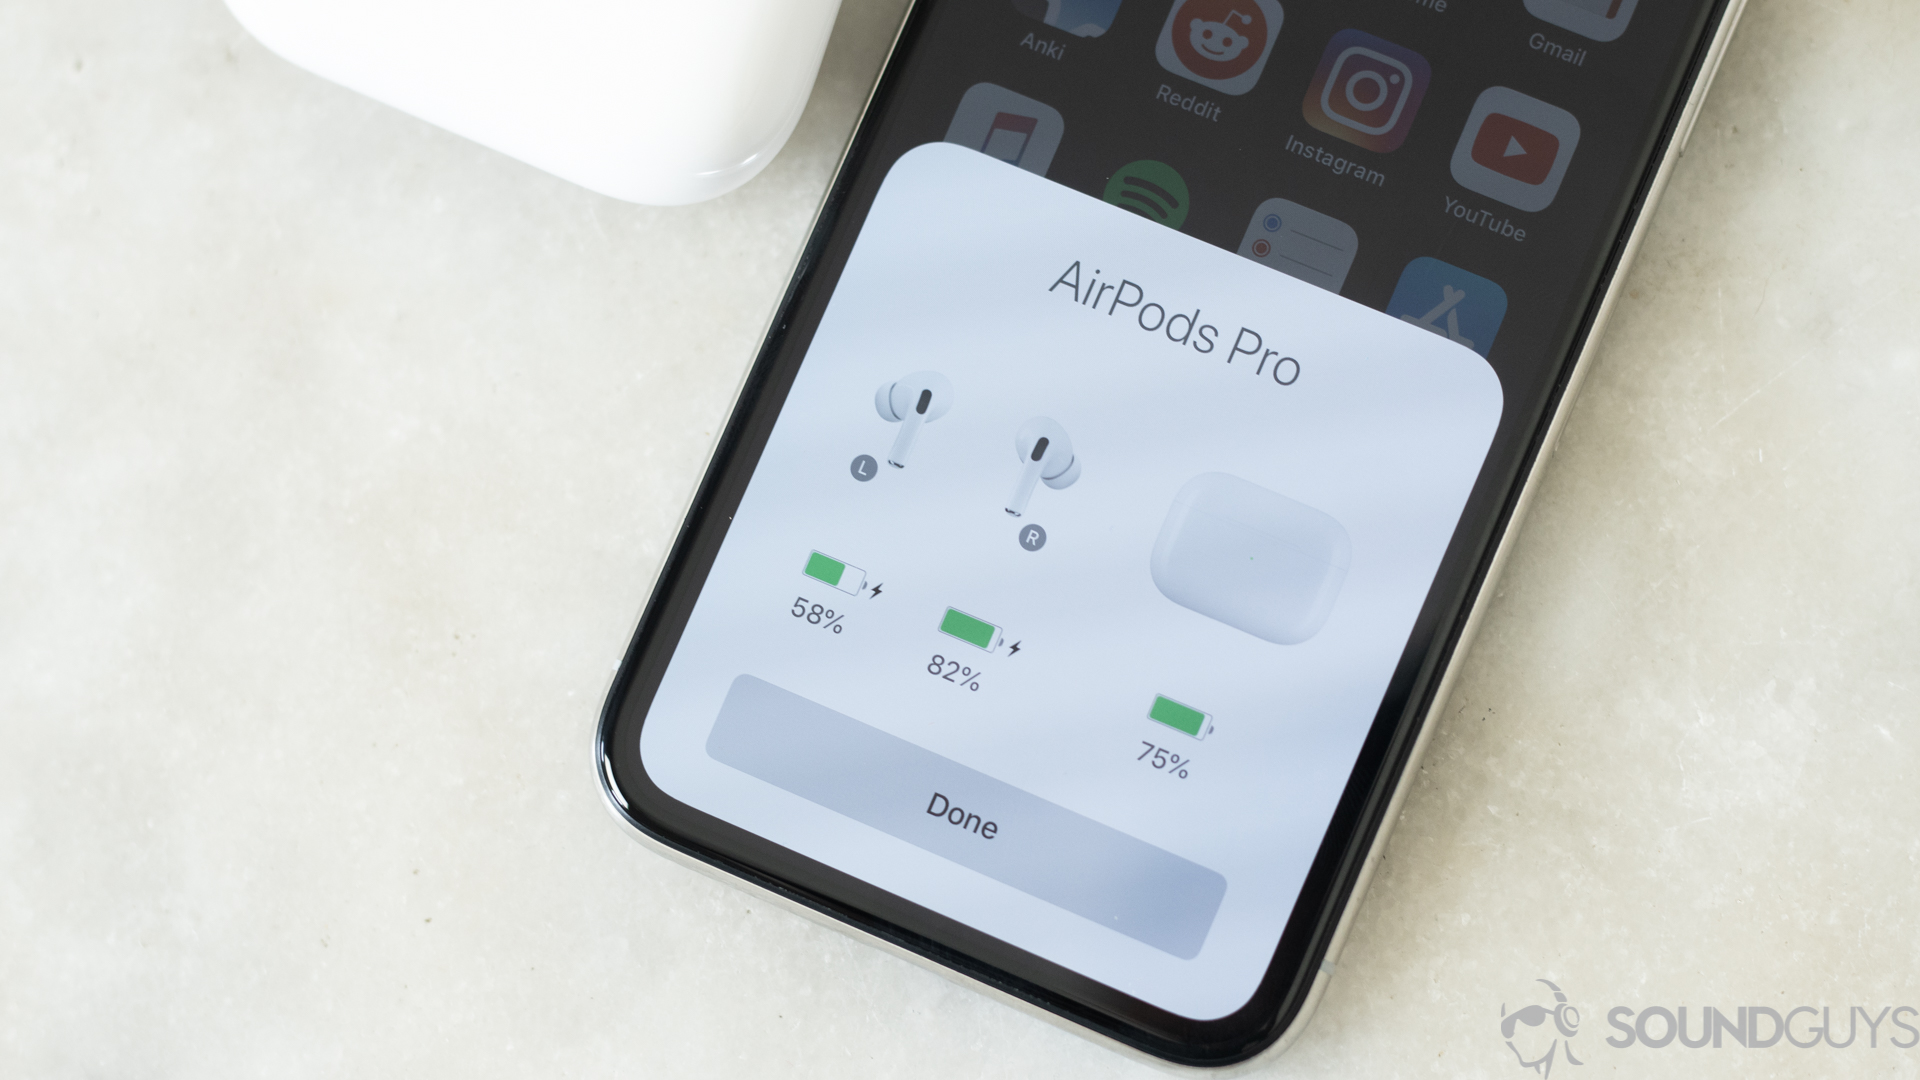 The Apple AirPods Pro touch settings on an iPhone's display.